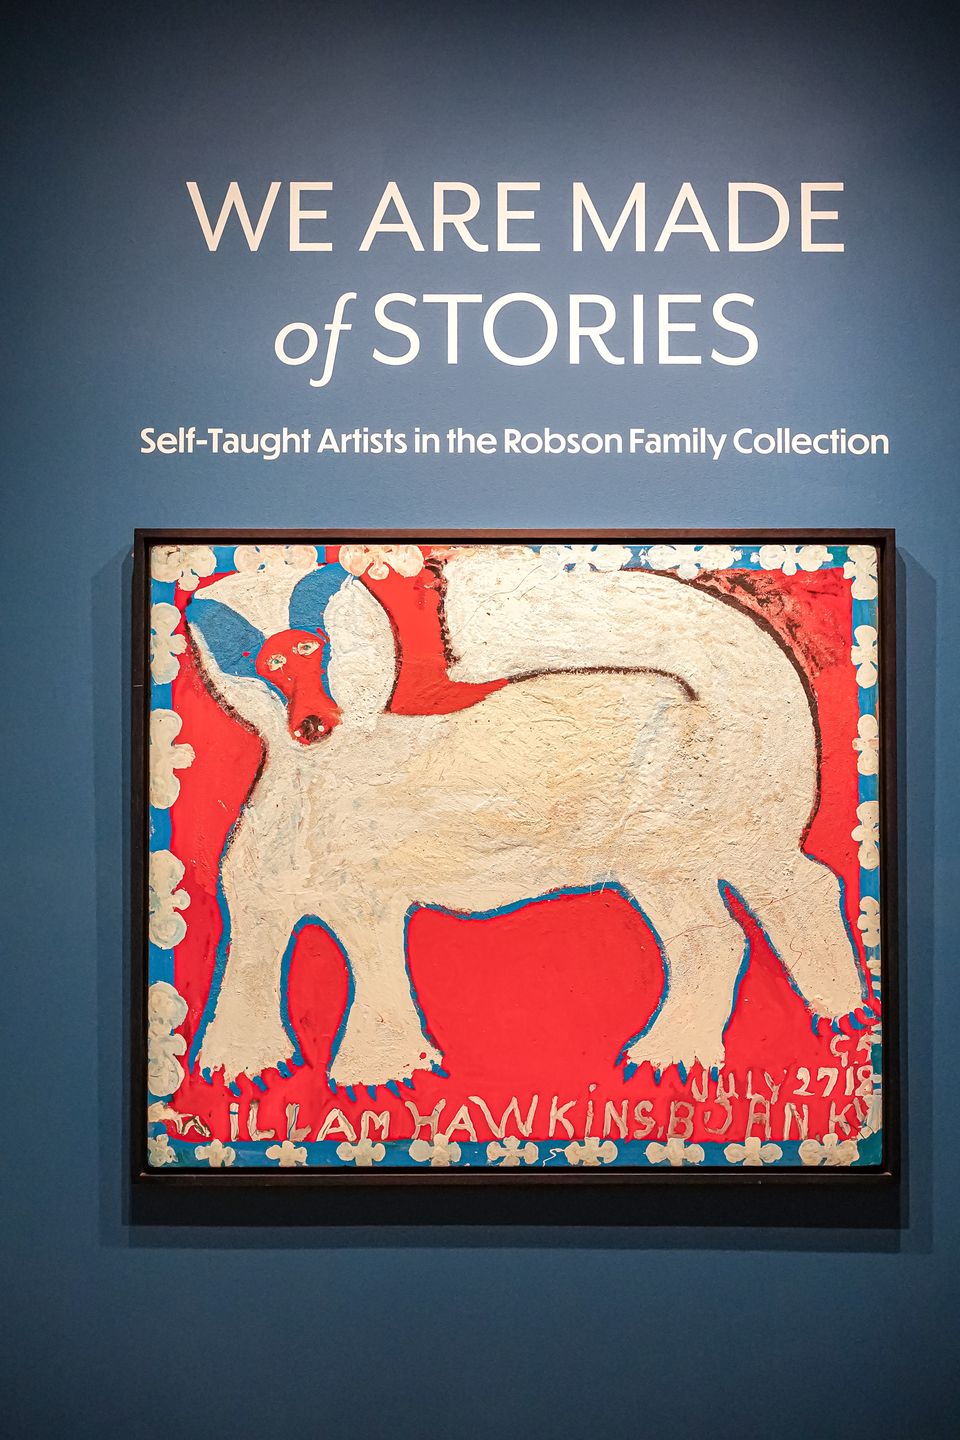 Blue wall with a painting of a dog hanging and the title above it reads "We Are Made of Stories: Self-Taught Artists in the Robson Family Collection."